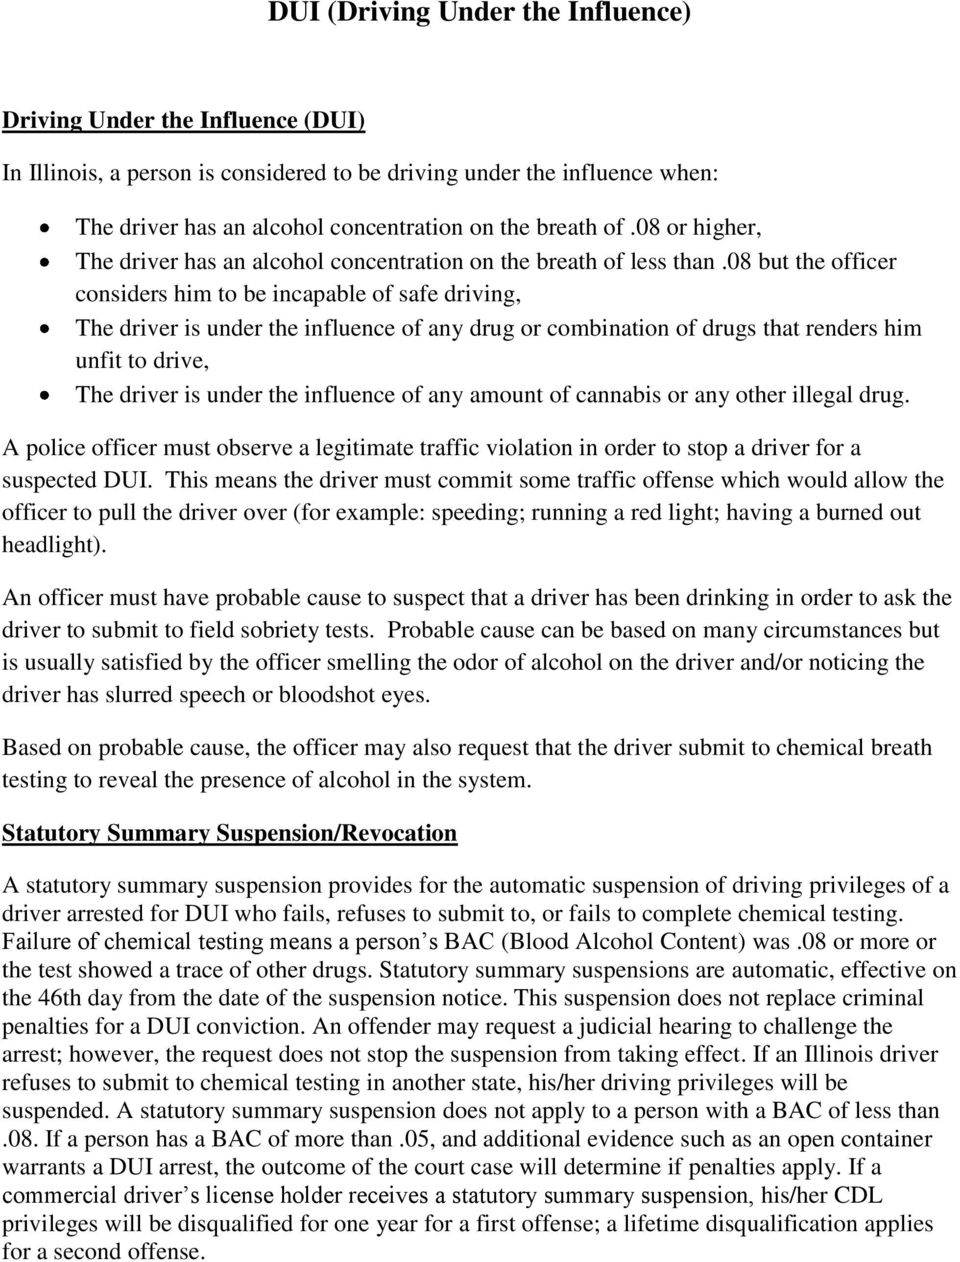 08 but the officer considers him to be incapable of safe driving, The driver is under the influence of any drug or combination of drugs that renders him unfit to drive, The driver is under the